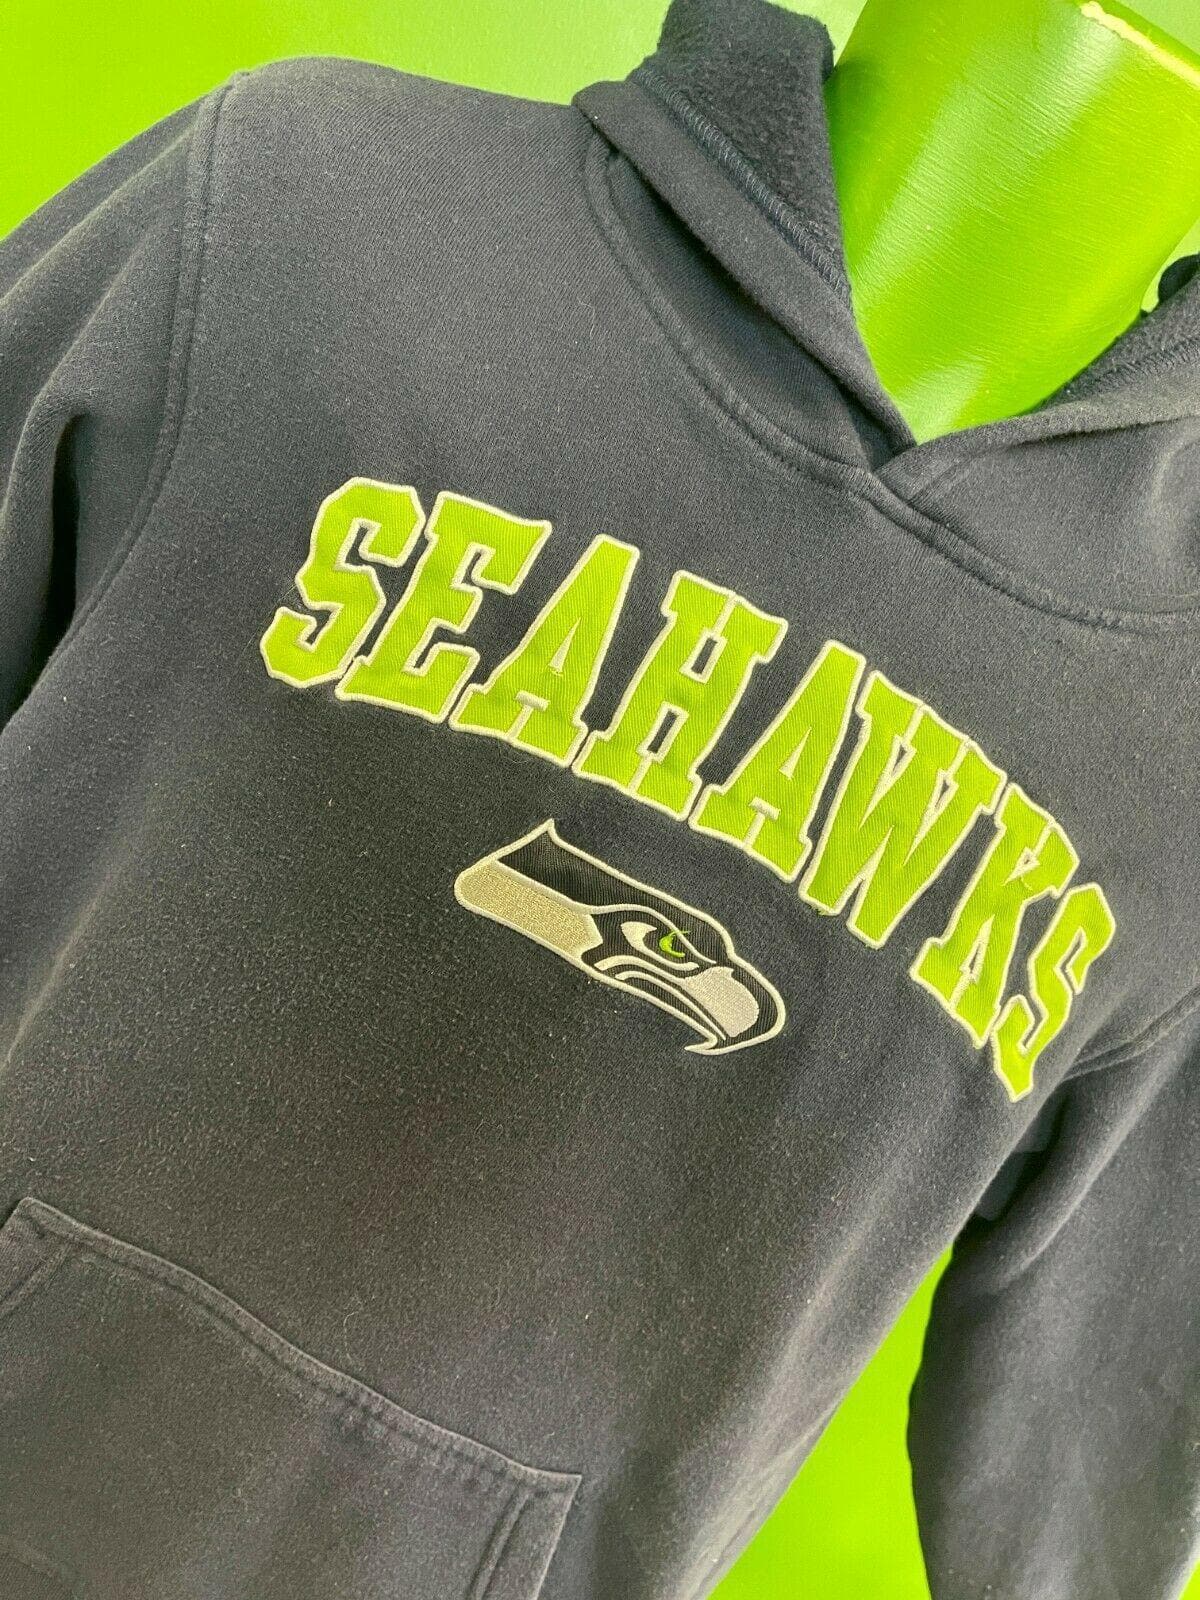 NFL Seattle Seahawks Pullover Hoodie Stitched Youth Large 14-16